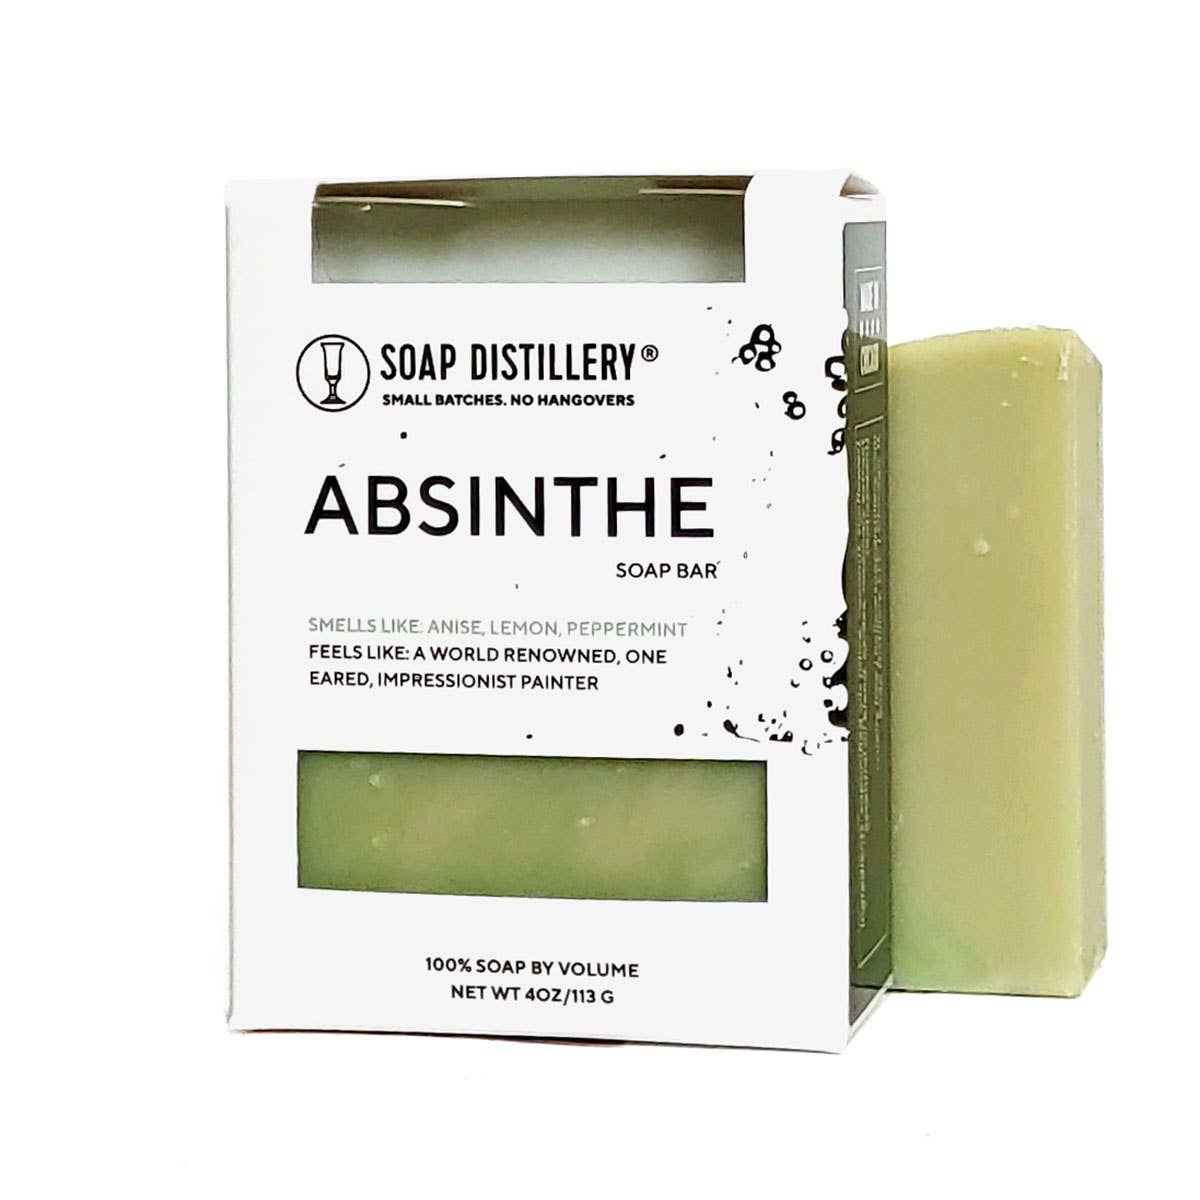 Photo of a light green bar of soap next to a packaged bar of soap in a black and white box with a label that says "Absinthe" with a description.